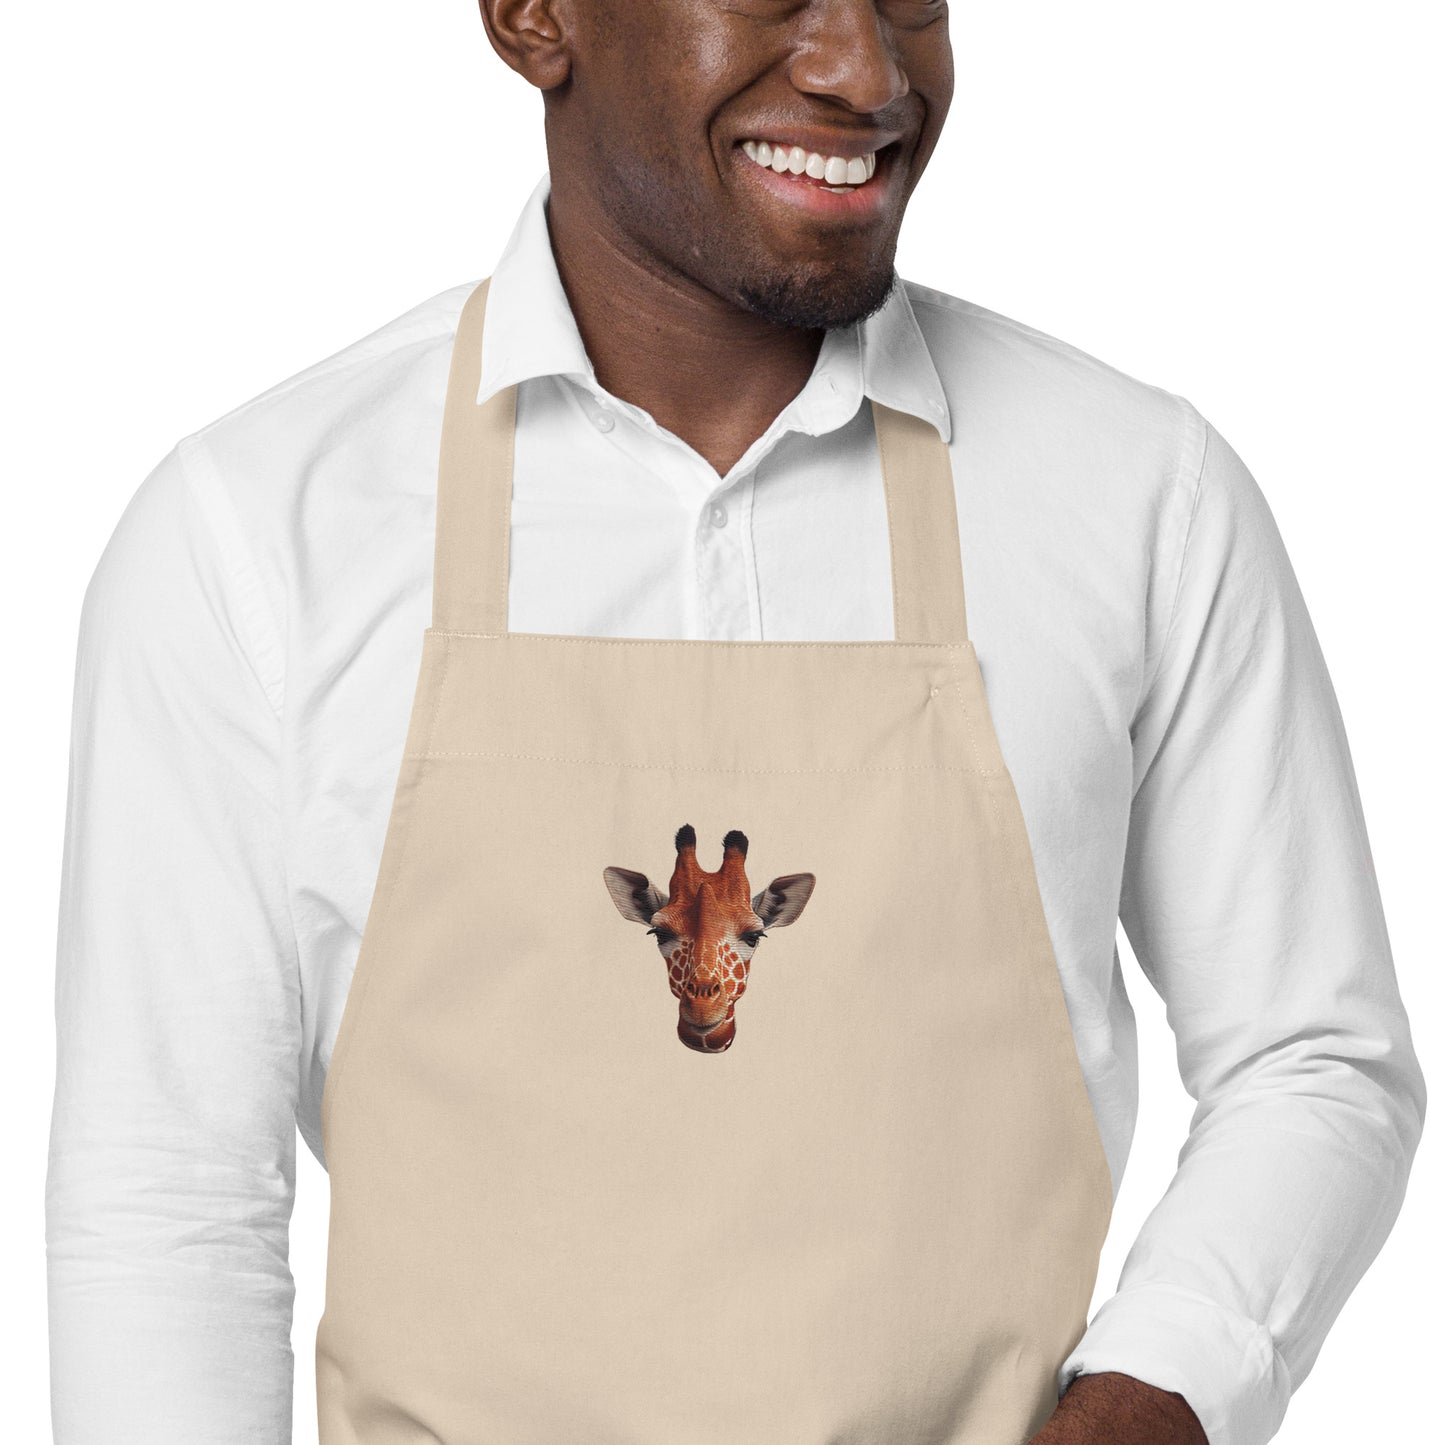 Organic cotton apron embroidered with a giraffe